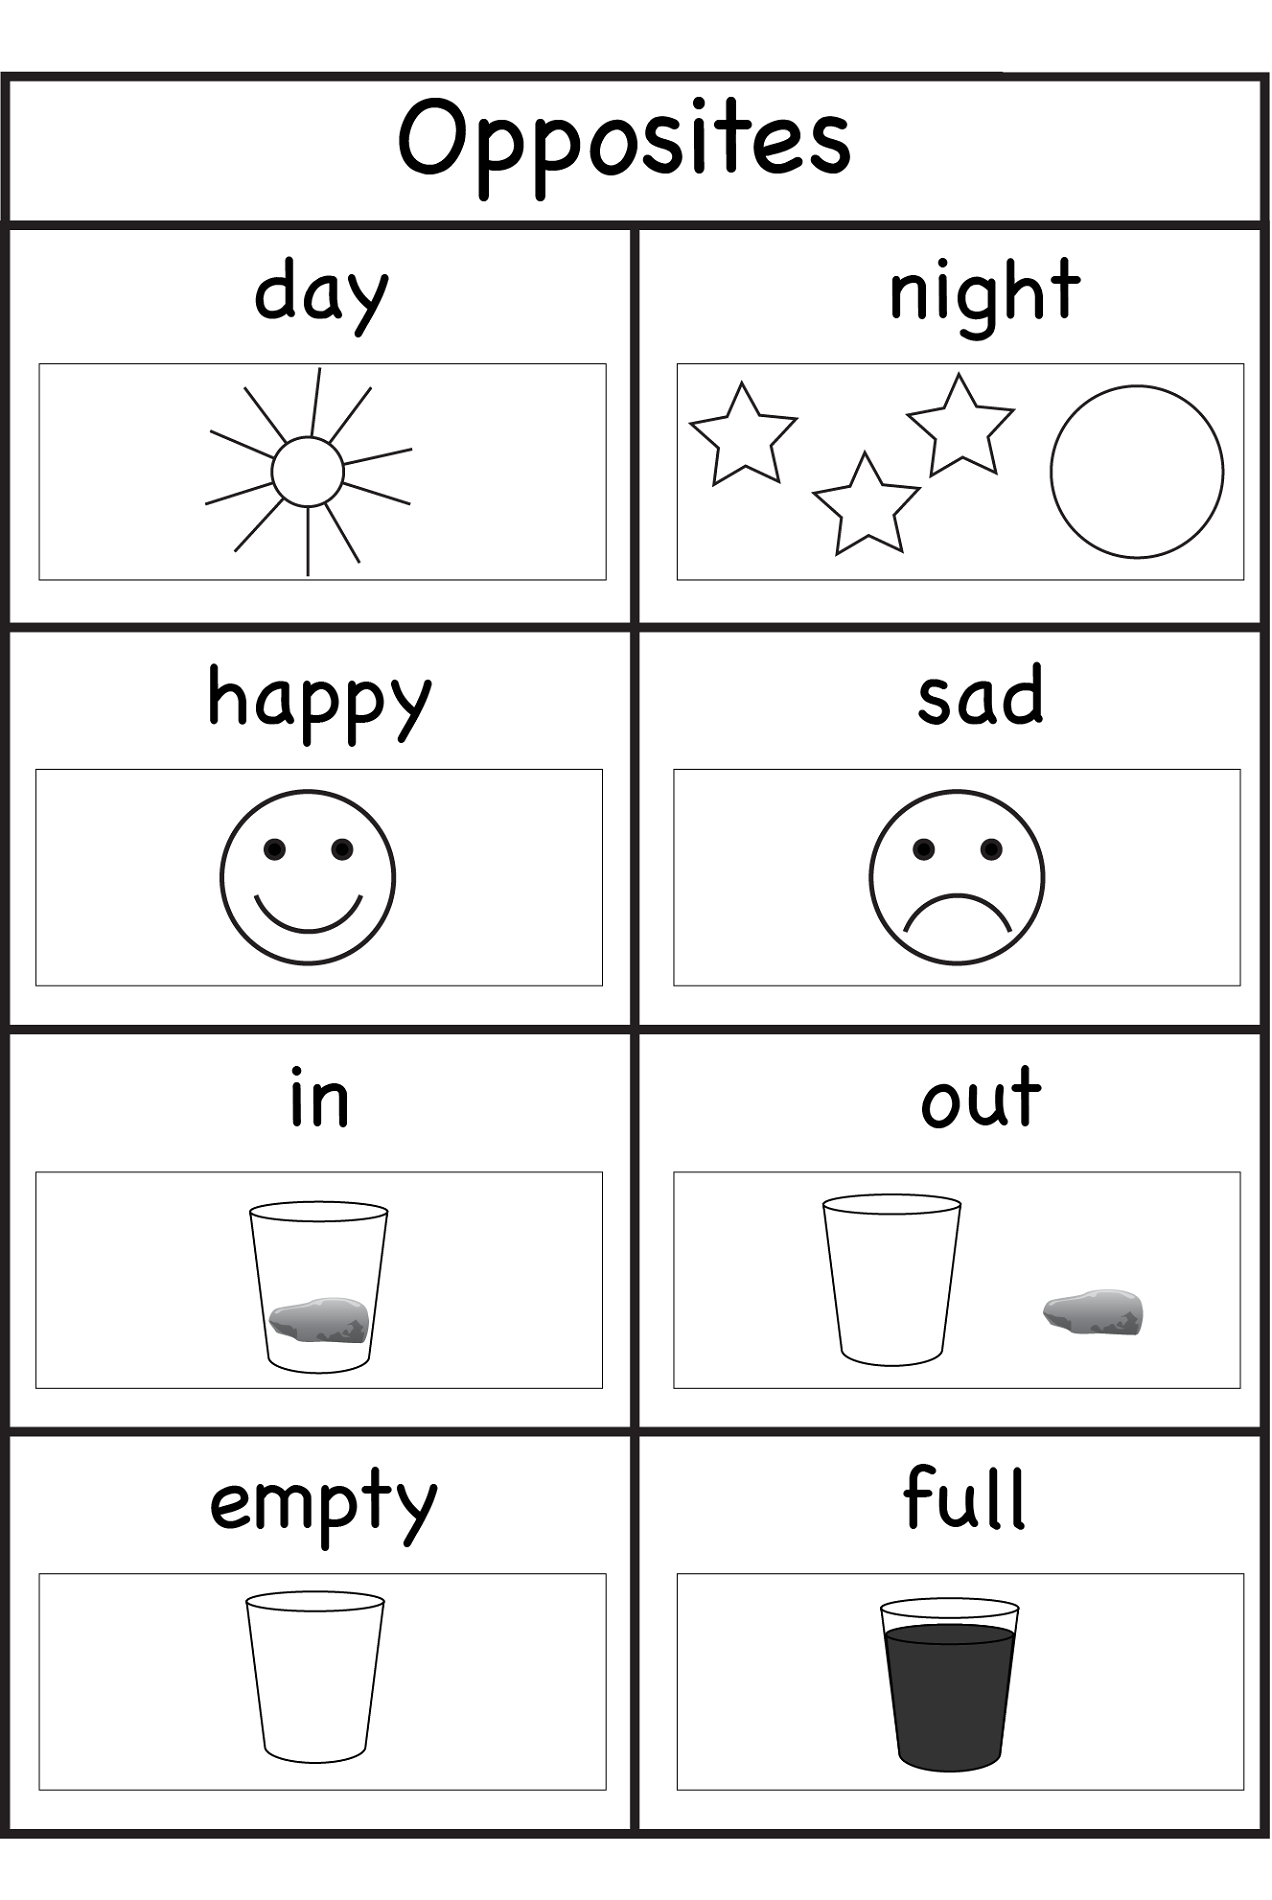 Activity Sheets For 3 Year Olds – With Free Preschool Worksheets Age | Printable Worksheets For 3 Year Olds